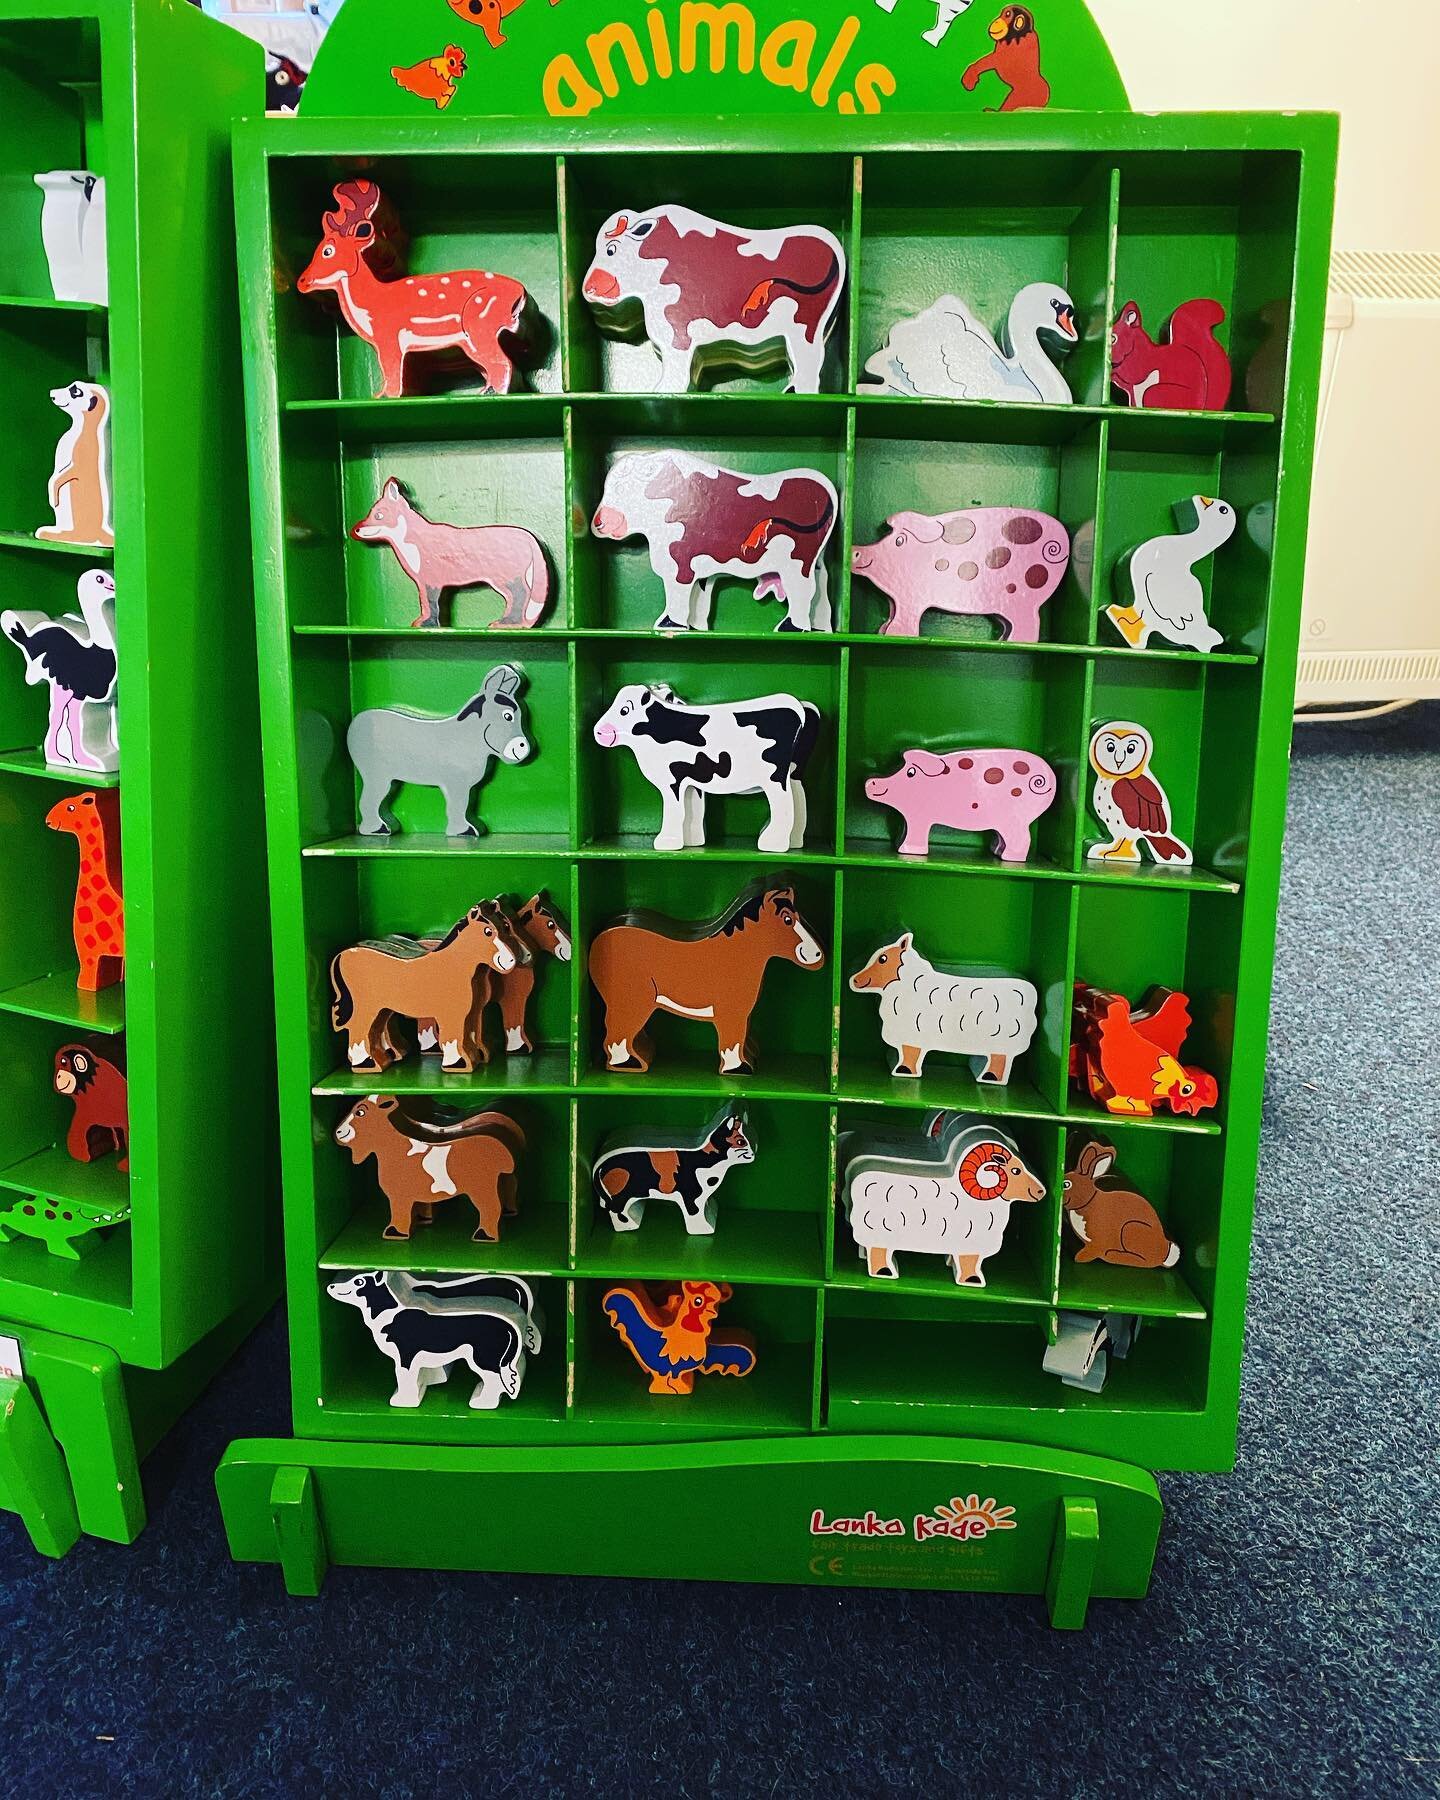 Is your farm or jungle short of any animals? We have both ranges. They make a great stocking filler. Extremely well made in Sri Lanka and are fairly traded. #farmanimals #junglesanimals #countrysideanimals #fairlytraded #stockingfillers #srilanka